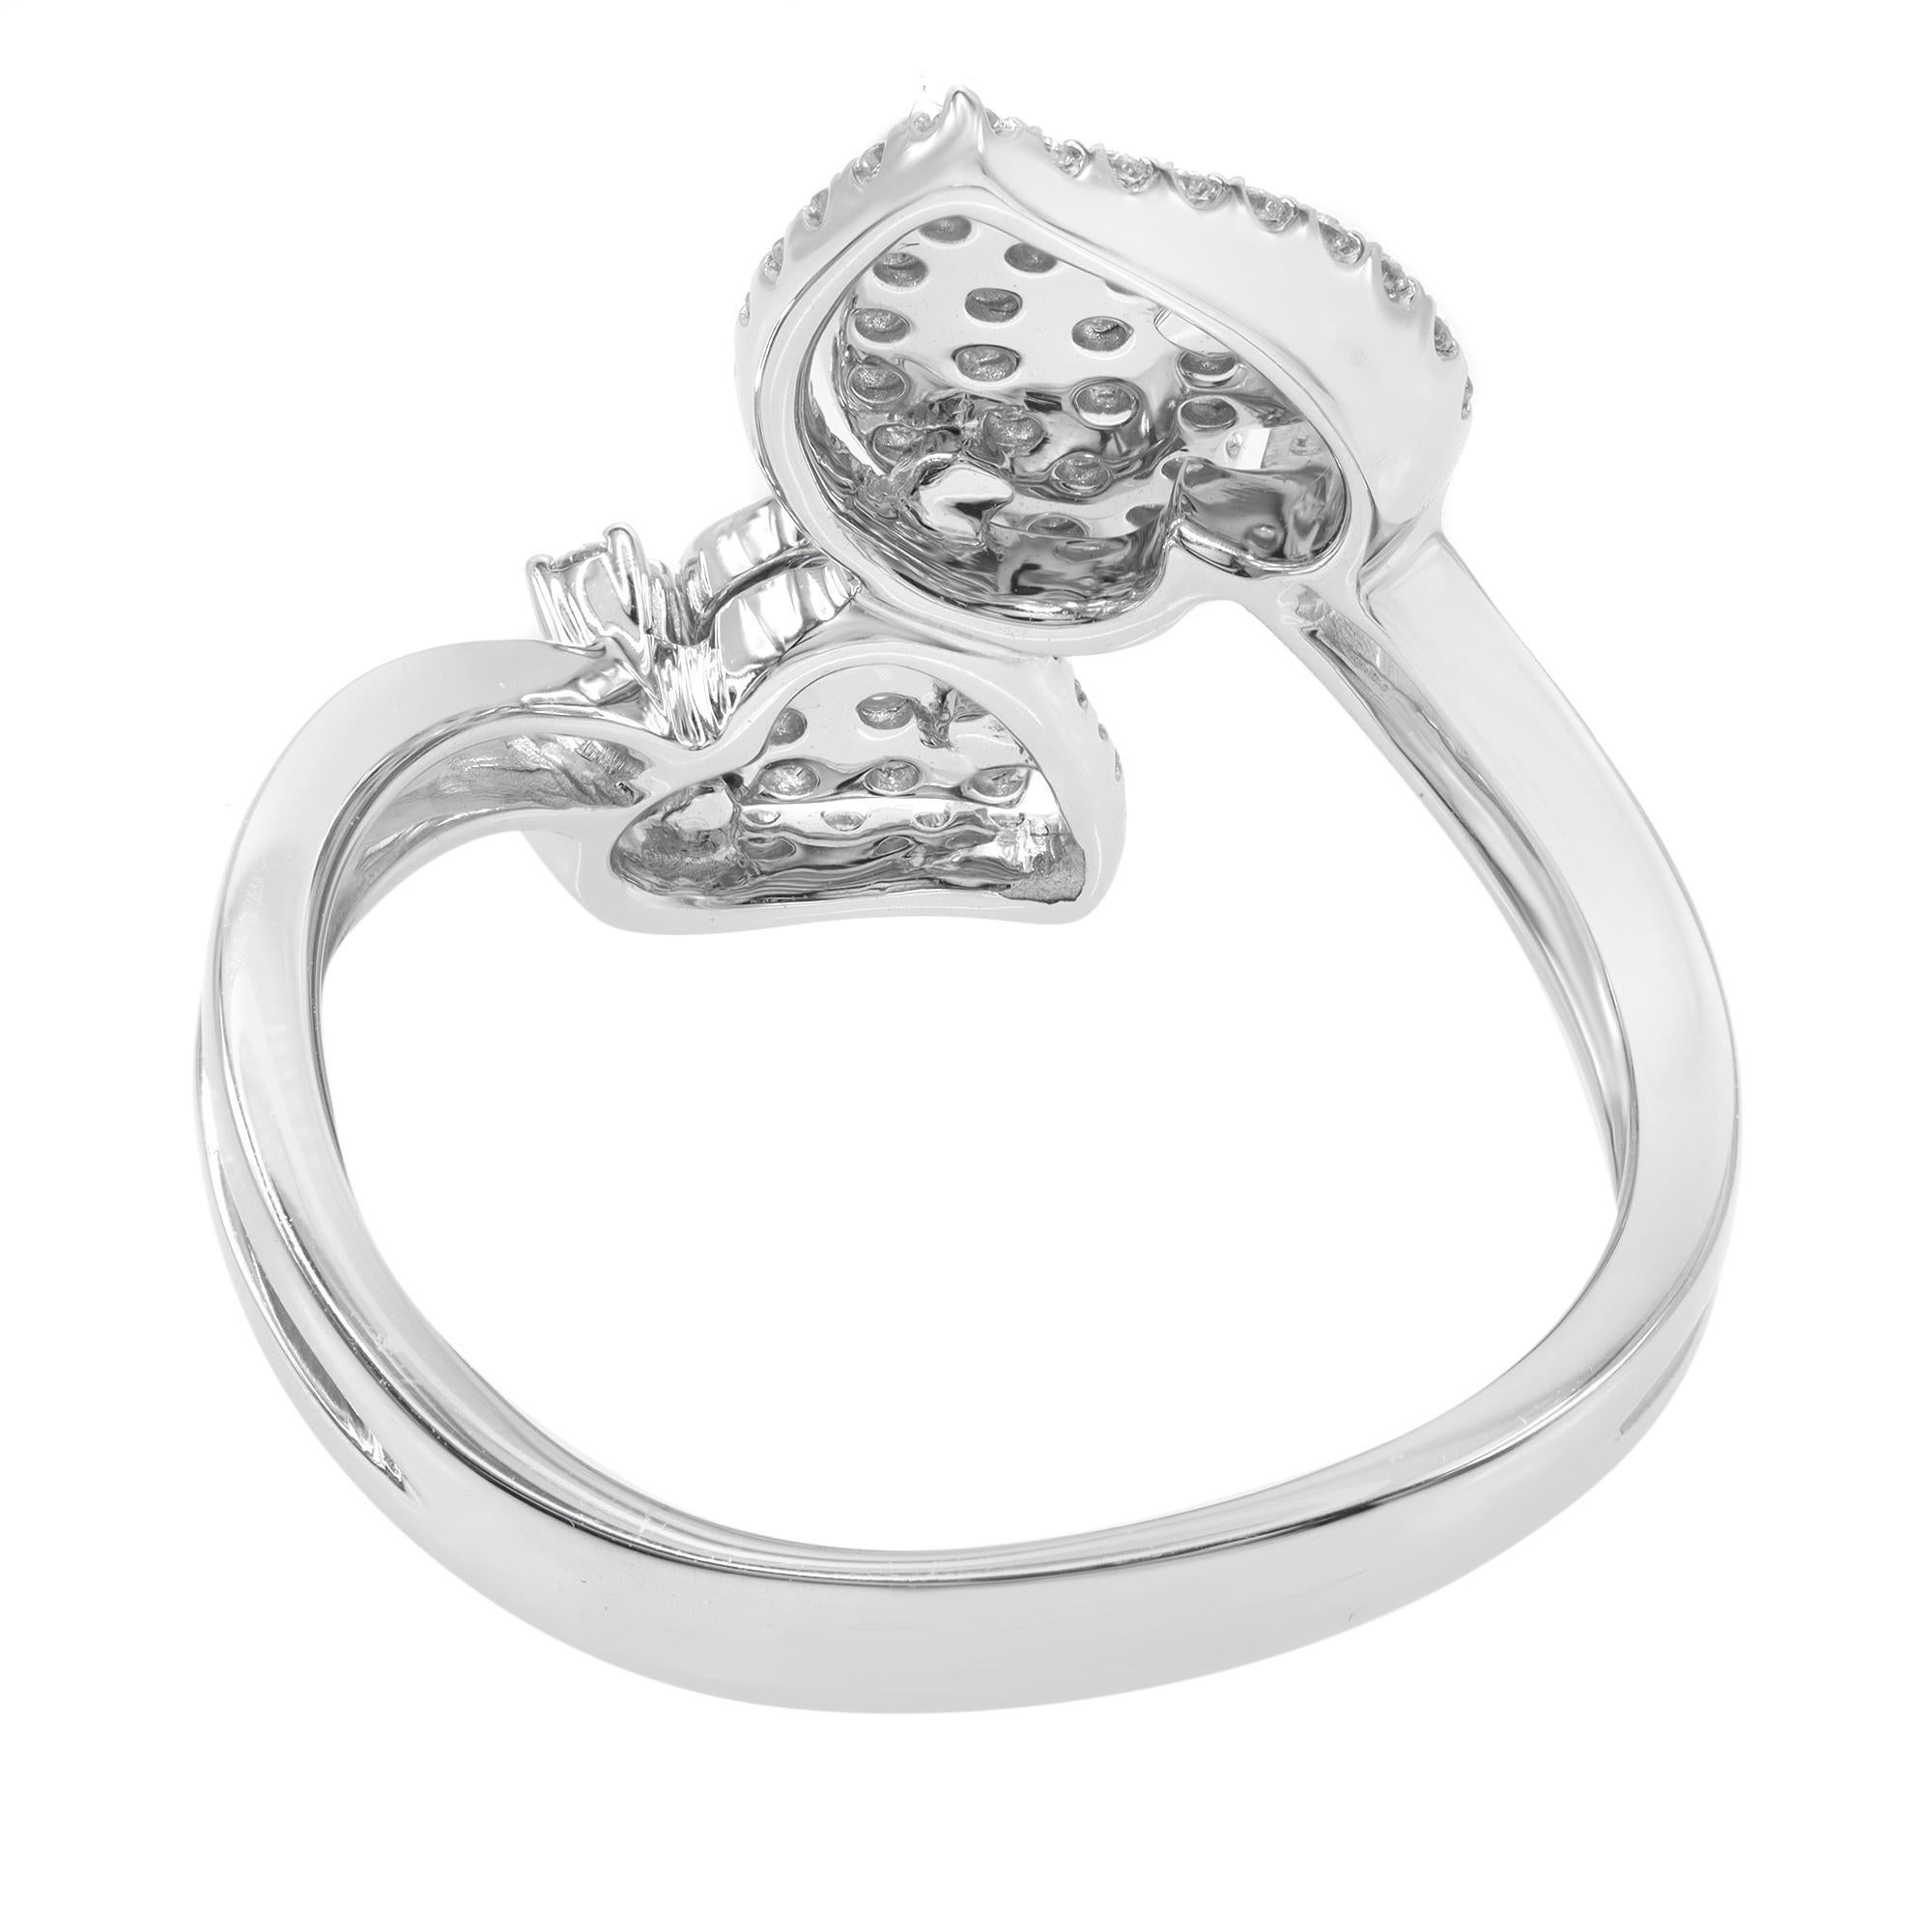 Rachel Koen double heart diamond ring crafted in 18k white gold. This ring features brilliant round cut diamonds pave set in heart shape shanks. The total diamond carat weight is 0.53 with color G-H and clarity VS-SI. Ring size: 7. Comes with a